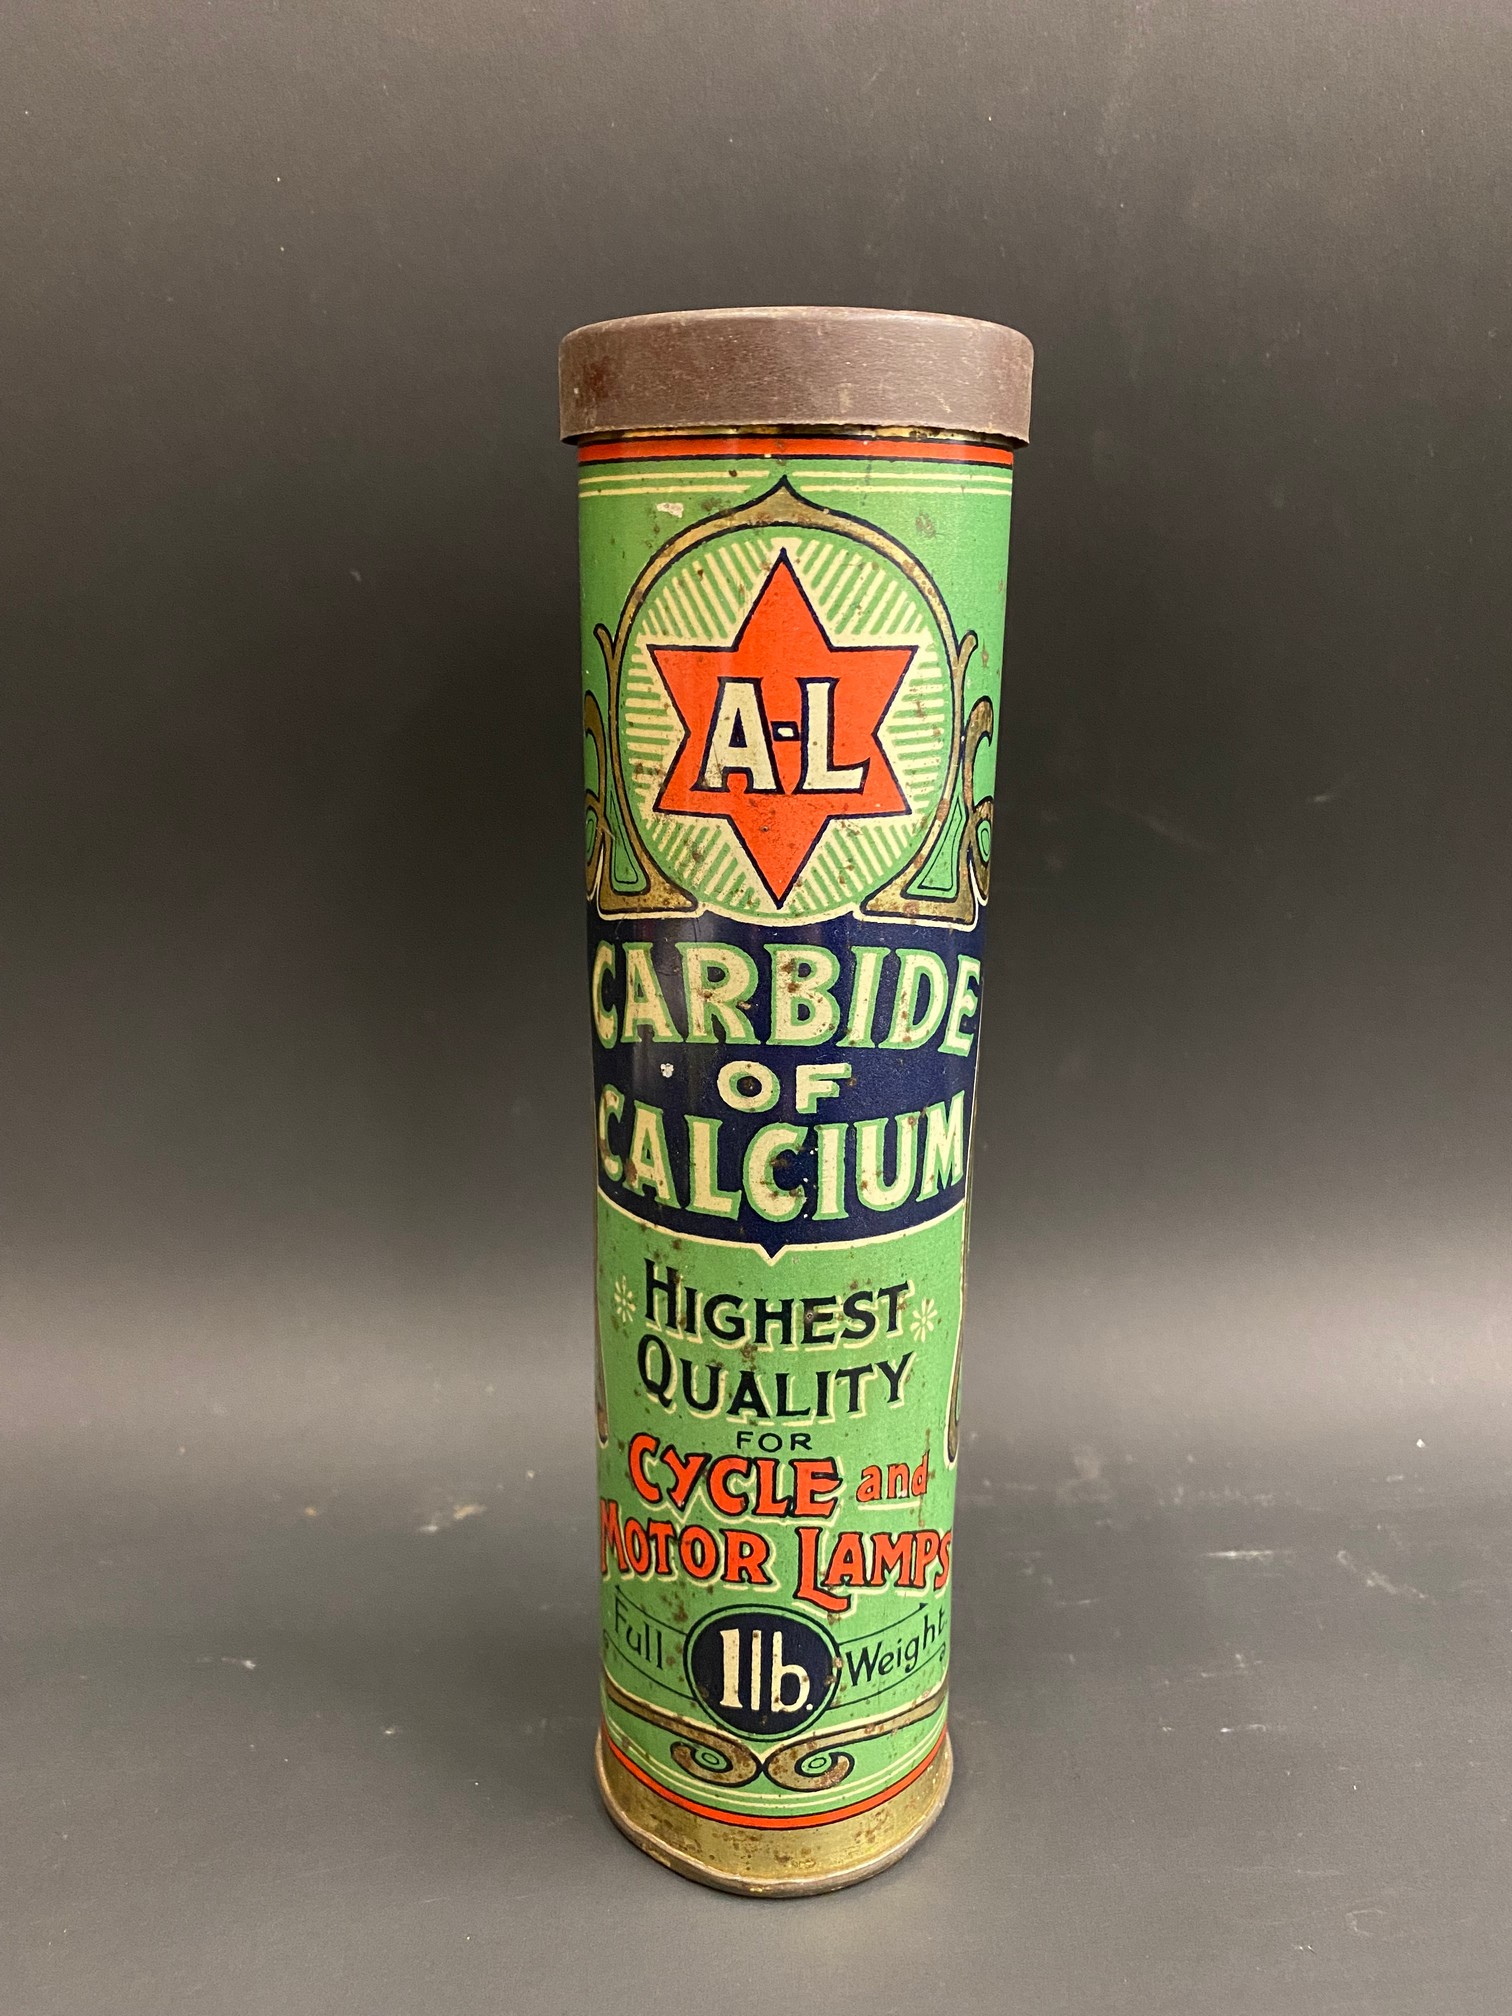 A Carbide of Calcium 1lb cylindrical tin in good condition.